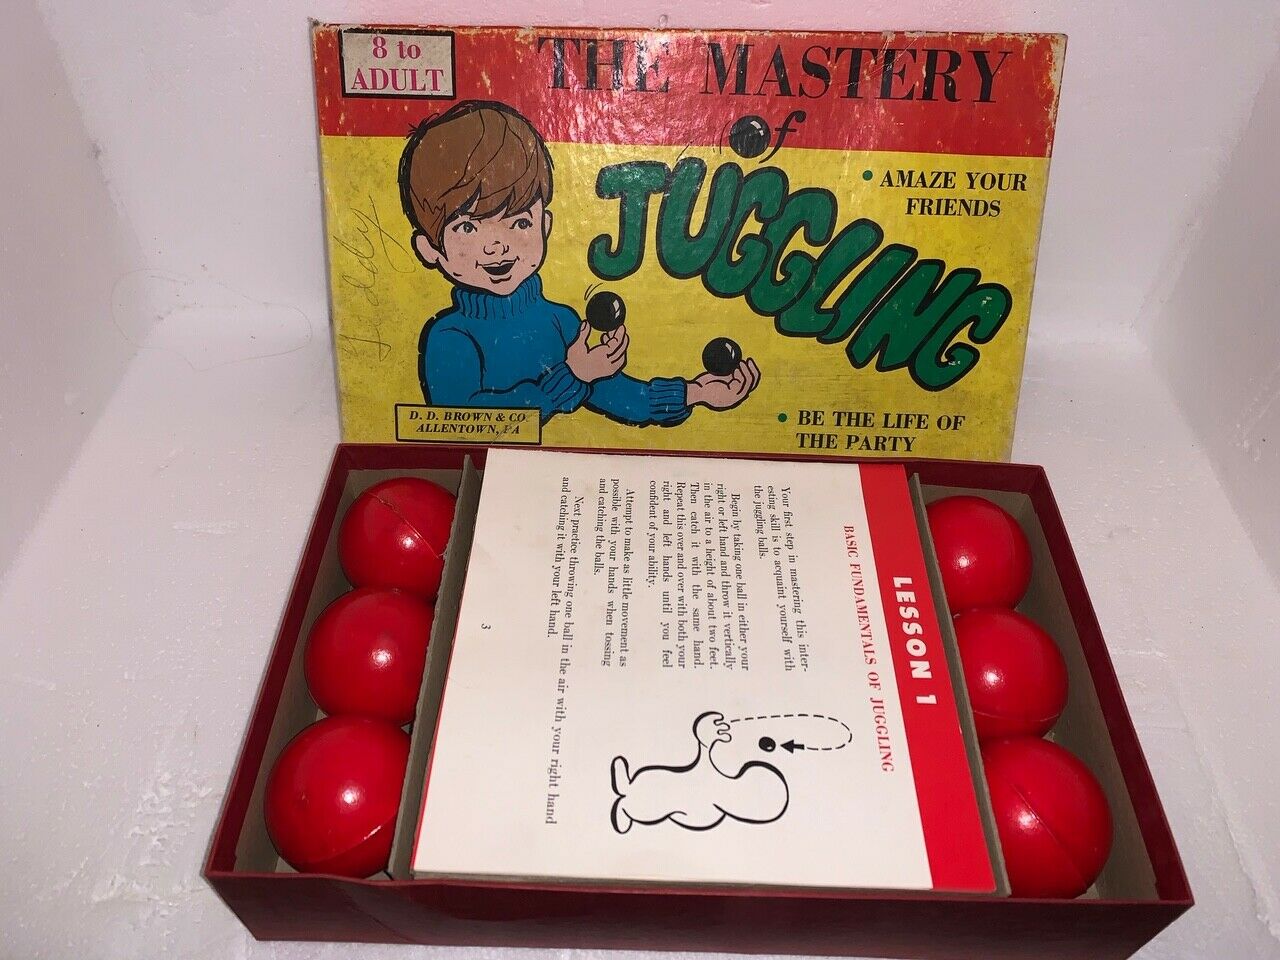 VINTAGE 1970s MASTERY OF JUGGLING TOY INSTRUCTIONAL SET LEARN TO JUGGLE